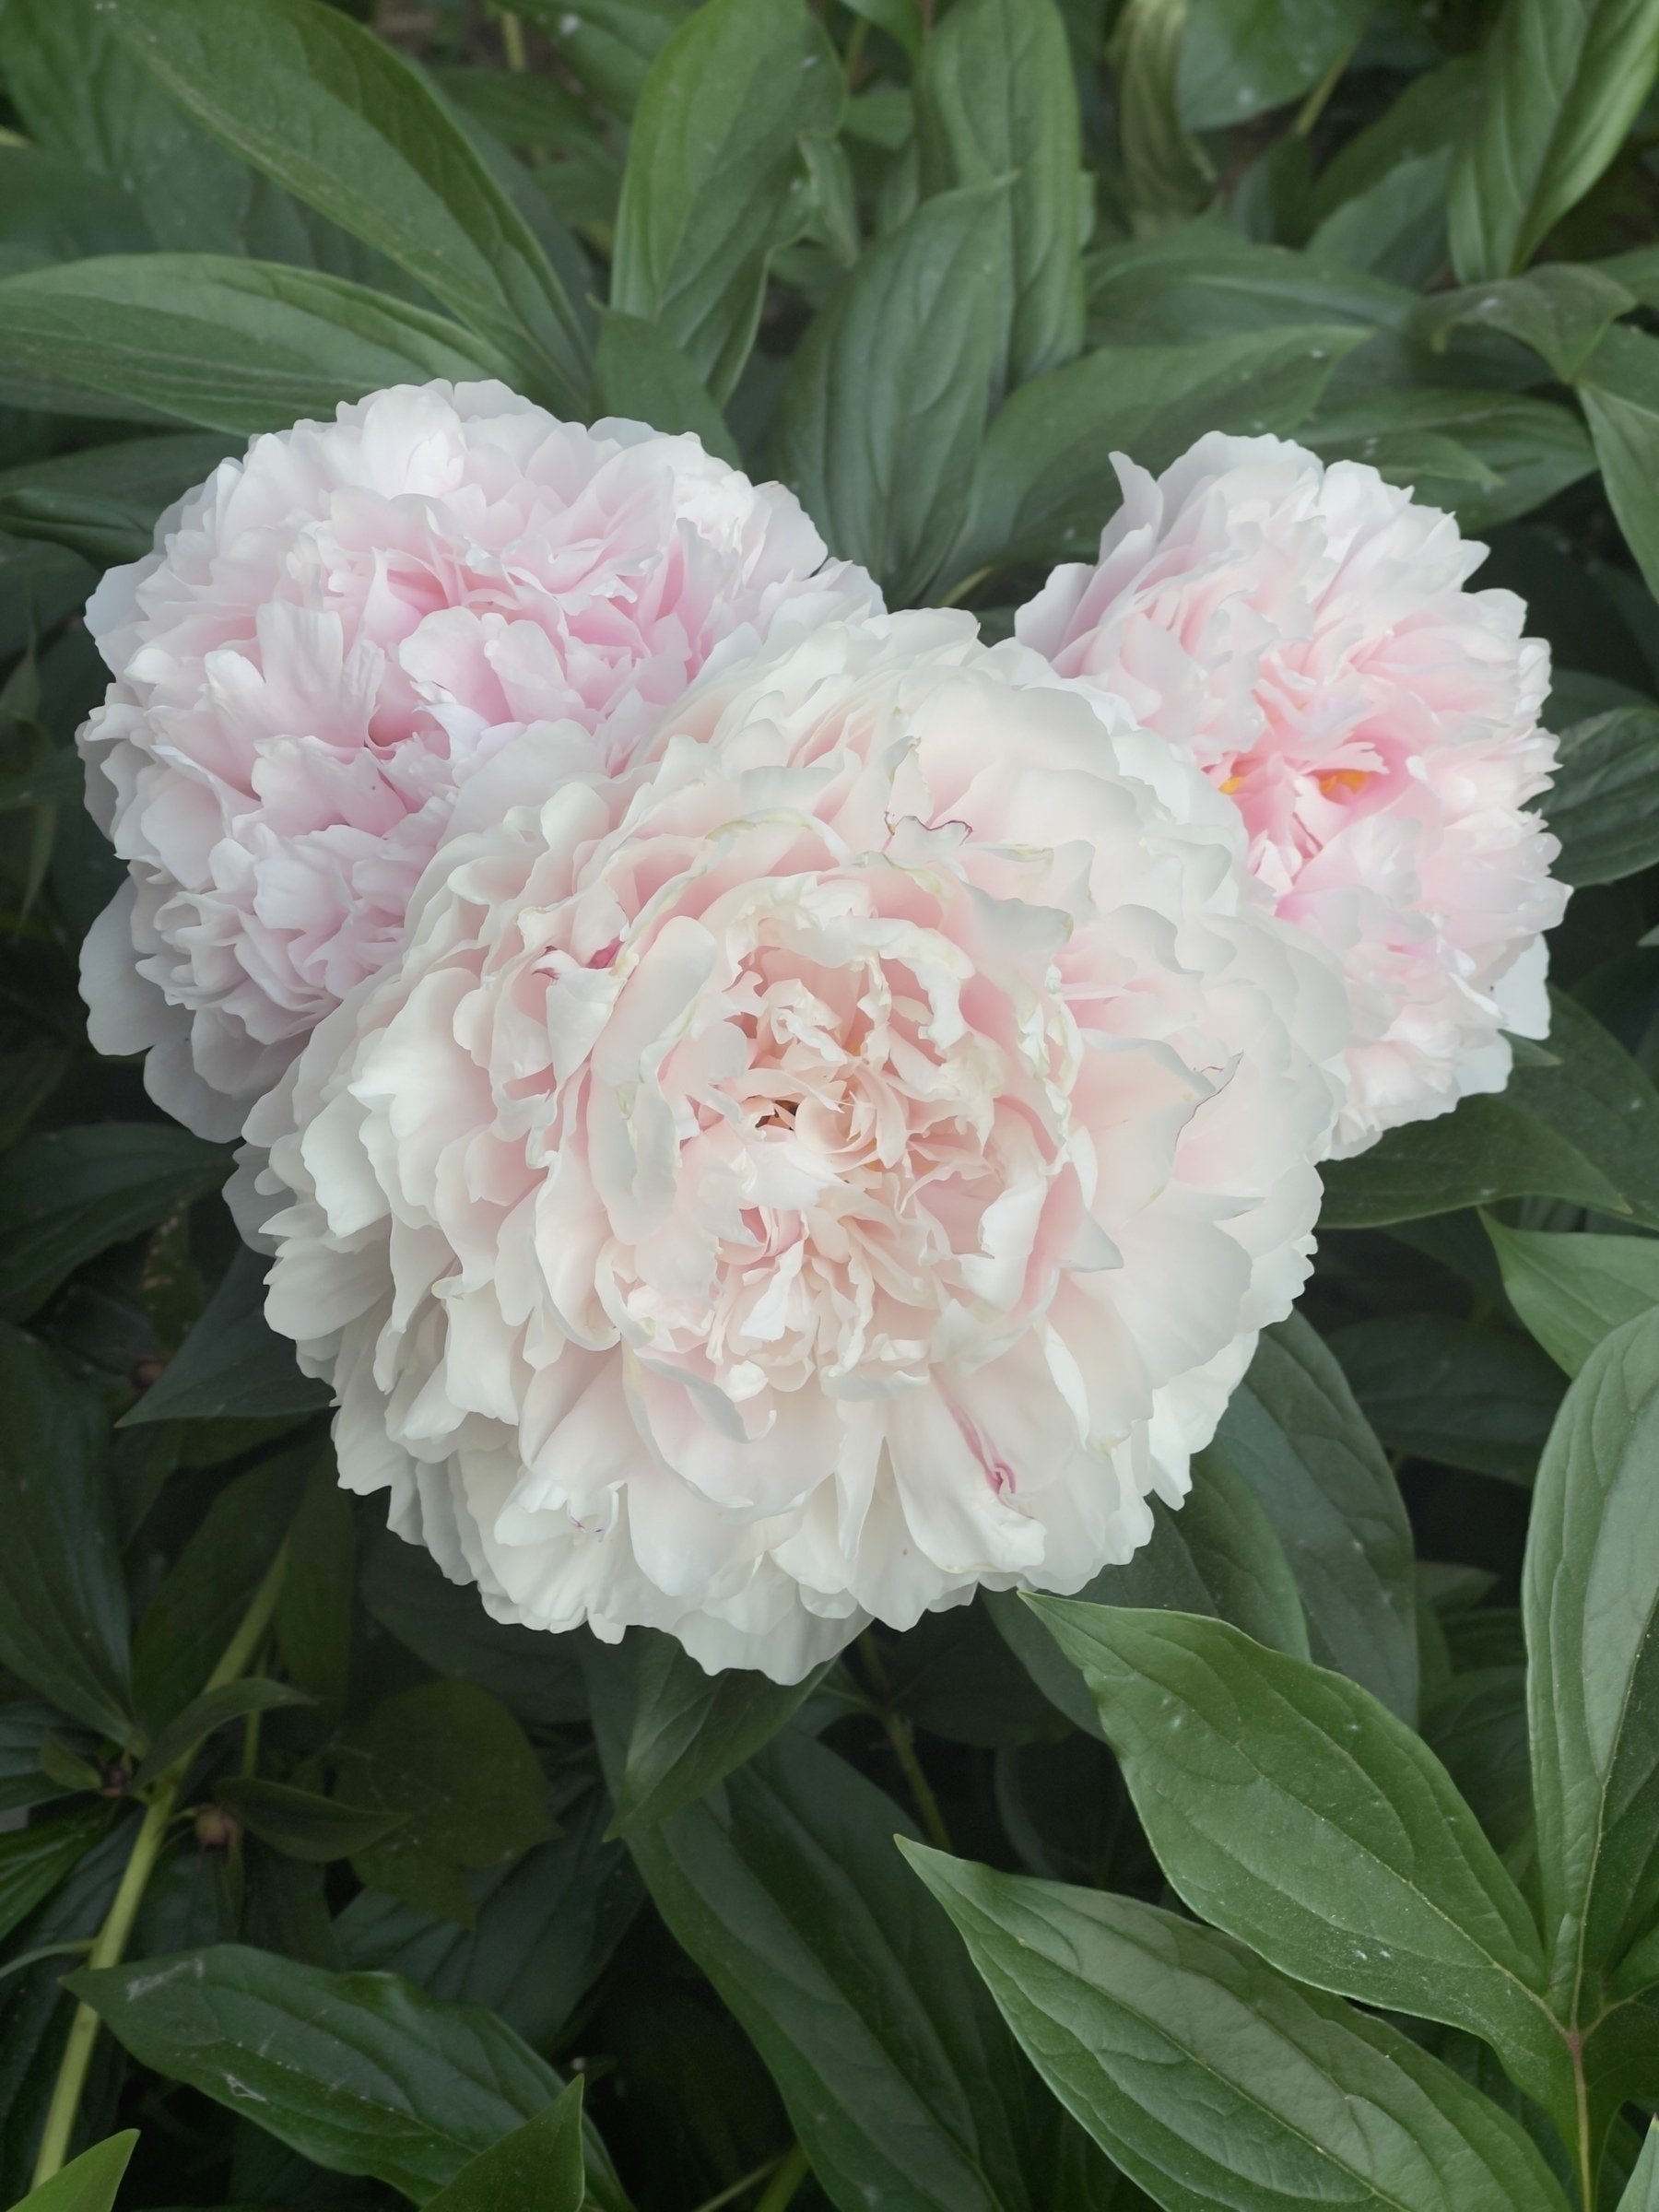 Three pink/white peonies against a background of their leaves.